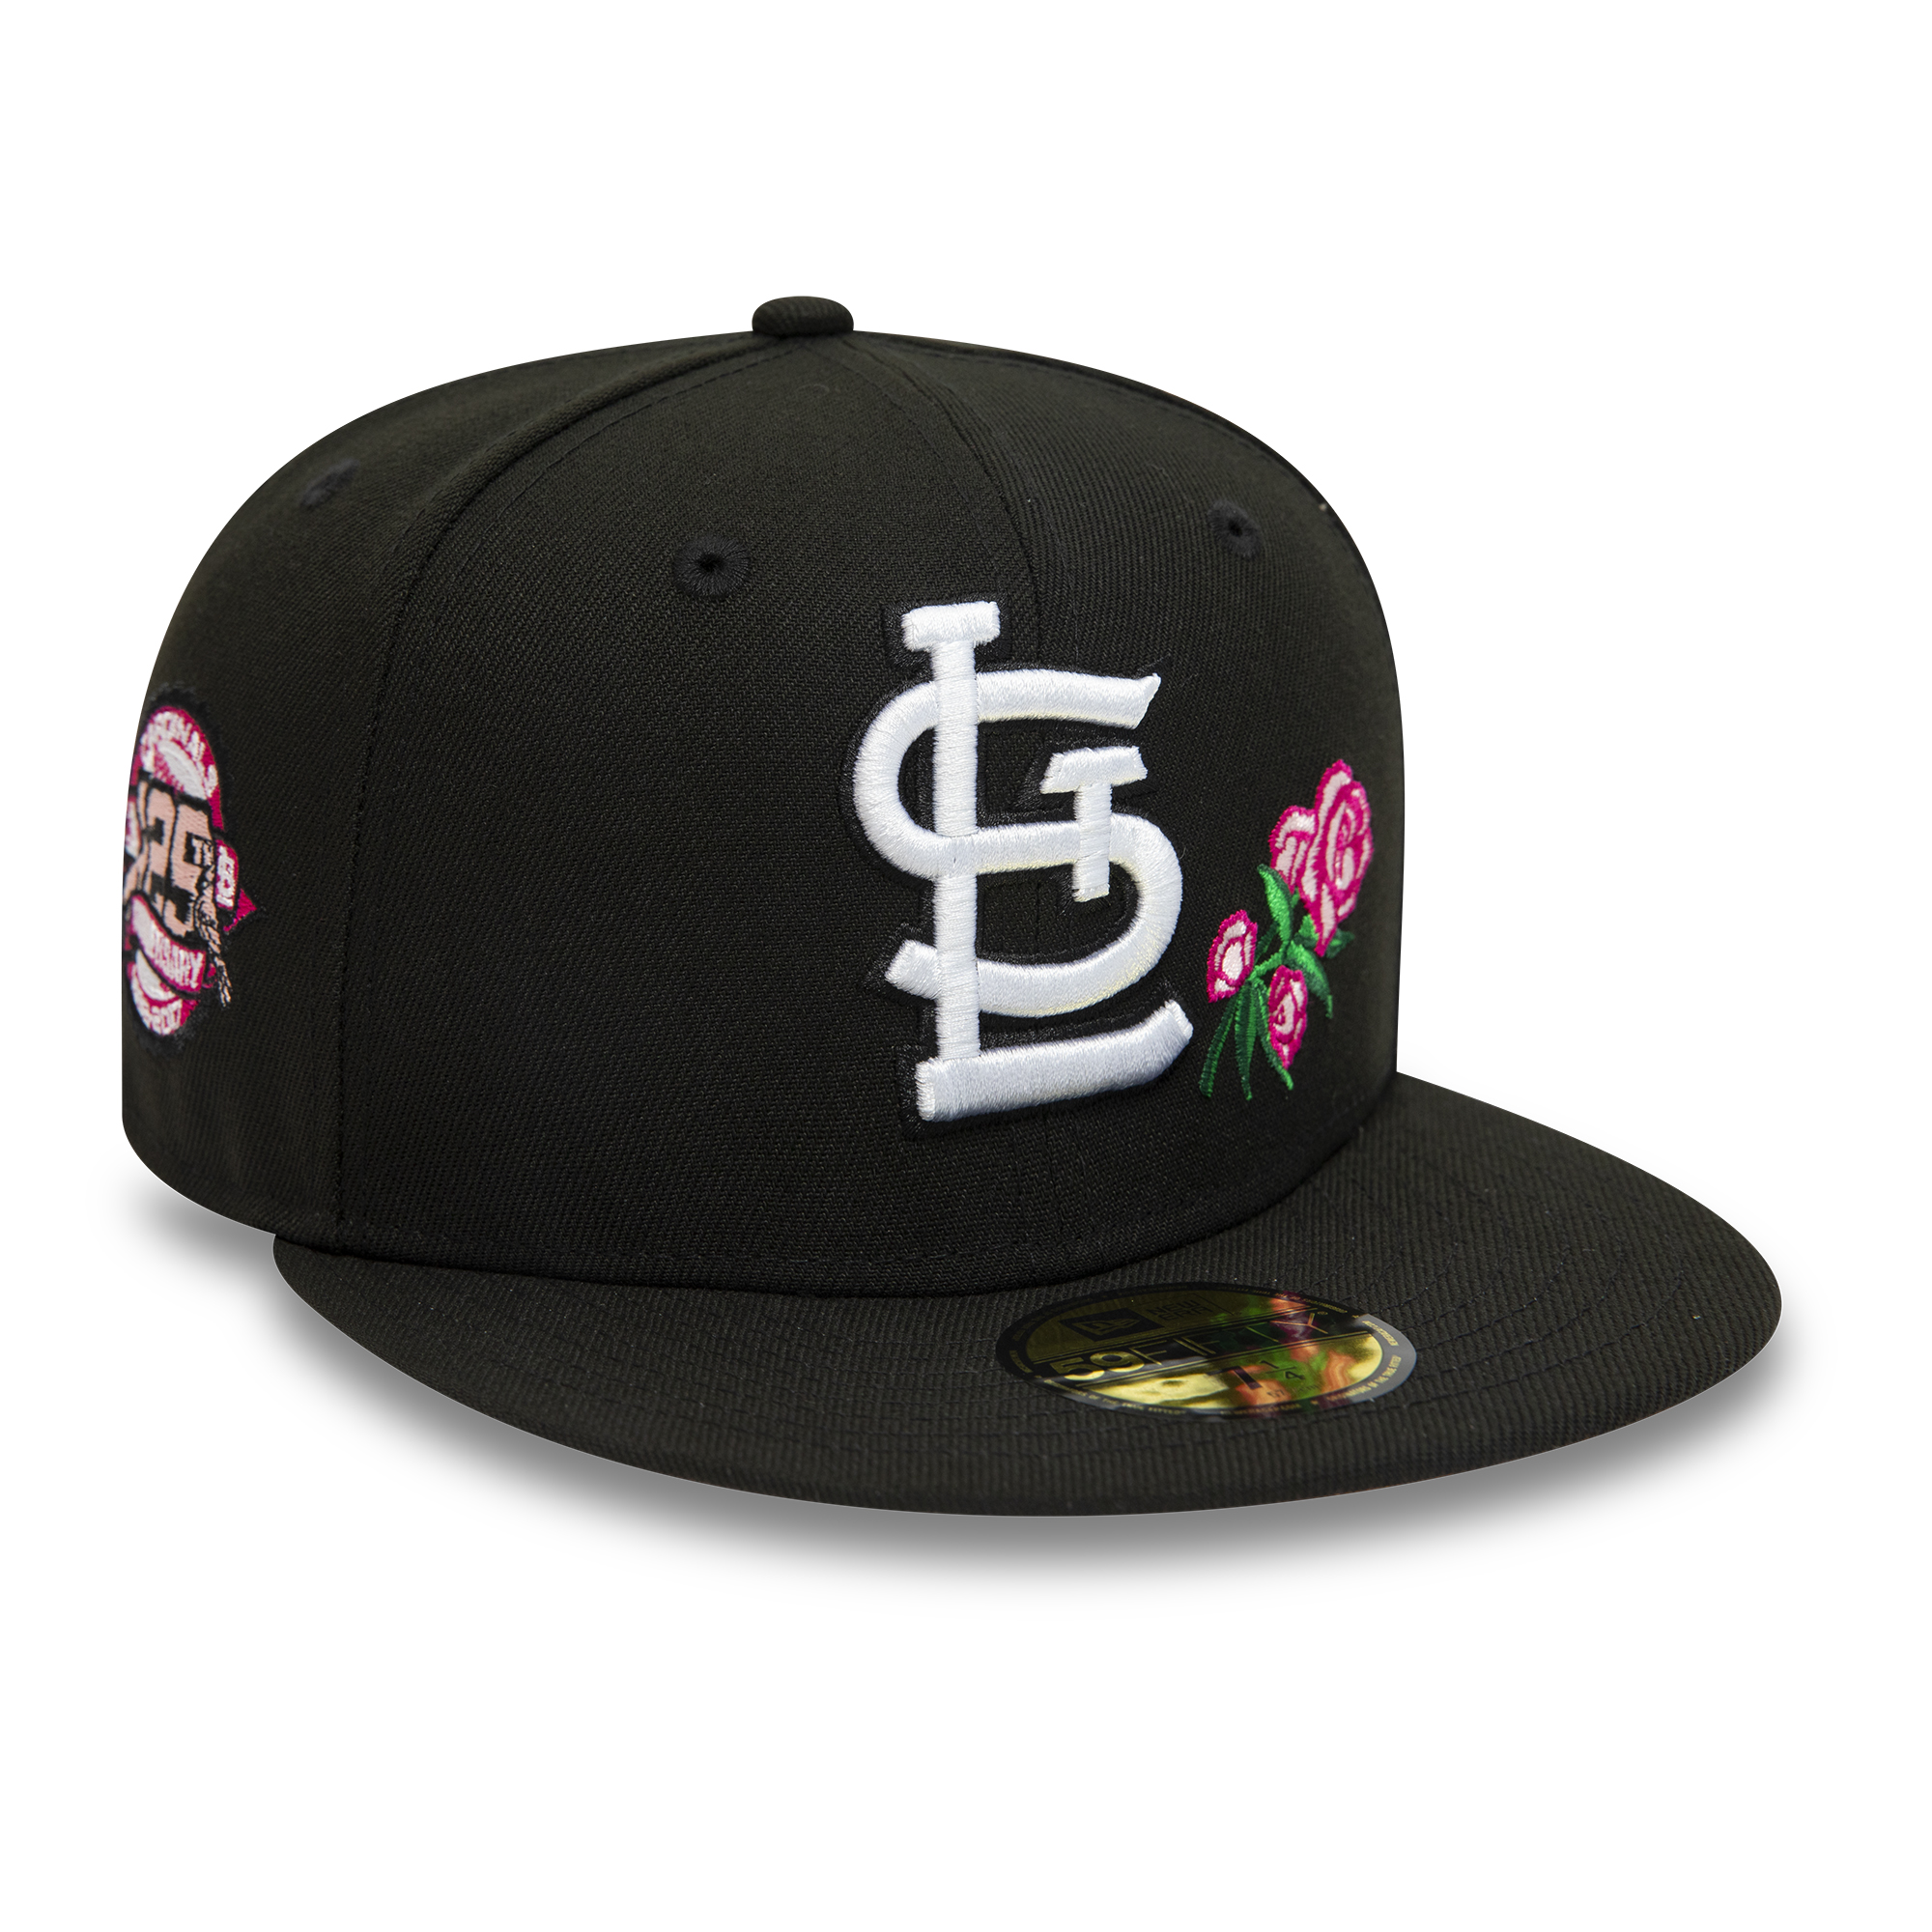 St. Louis Cardinals 125th Anniversary Black 59FIFTY Fitted Cap